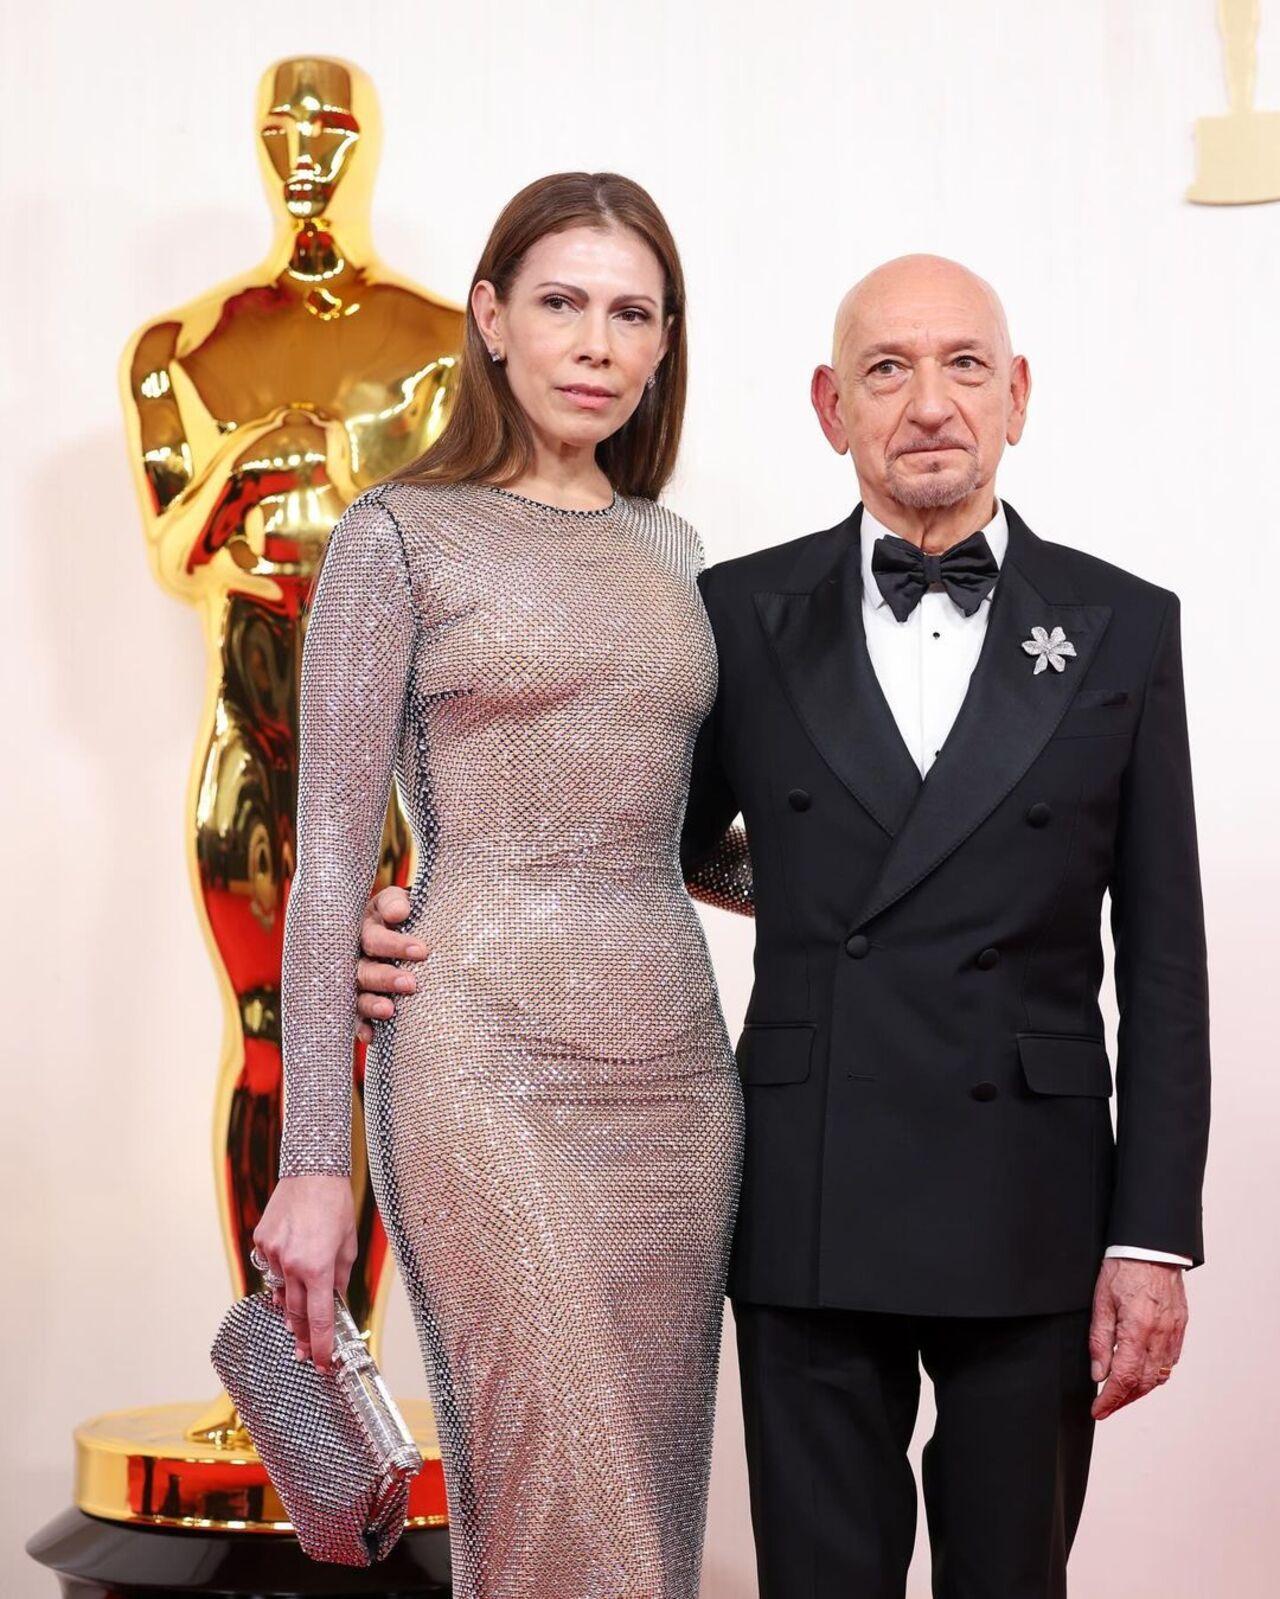 Ben Kingsley (born to English mother and Gujarati father) attended the ceremony with his partner Daniela Lavender

 
